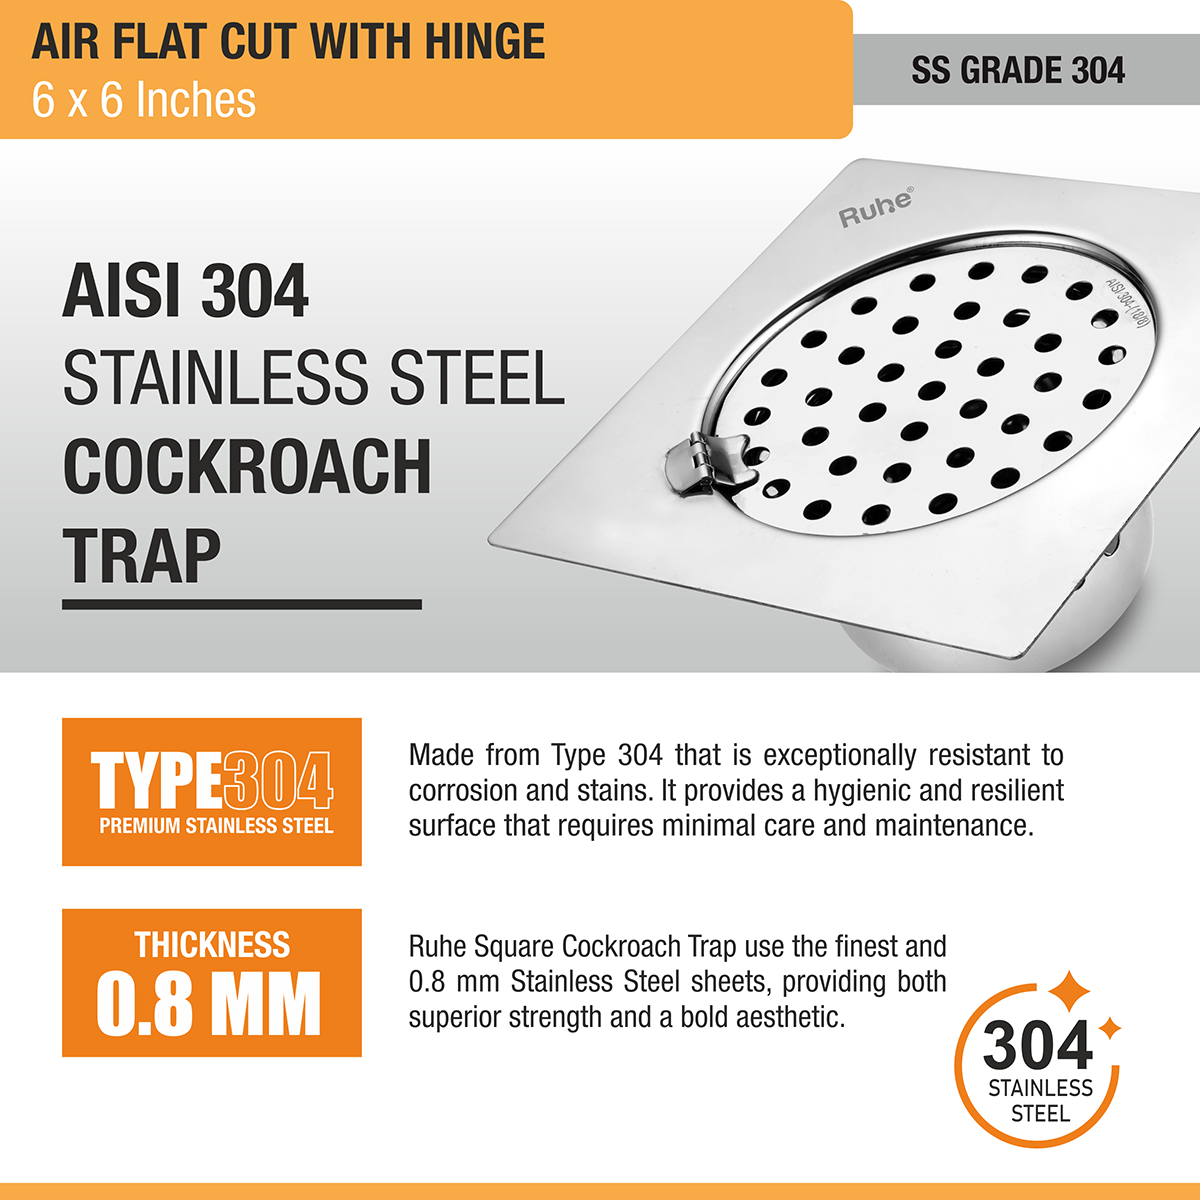 Air Square Flat Cut Floor Drain (6 x 6 Inches) with Hinge & Cockroach Trap (304 Grade) stainless steel